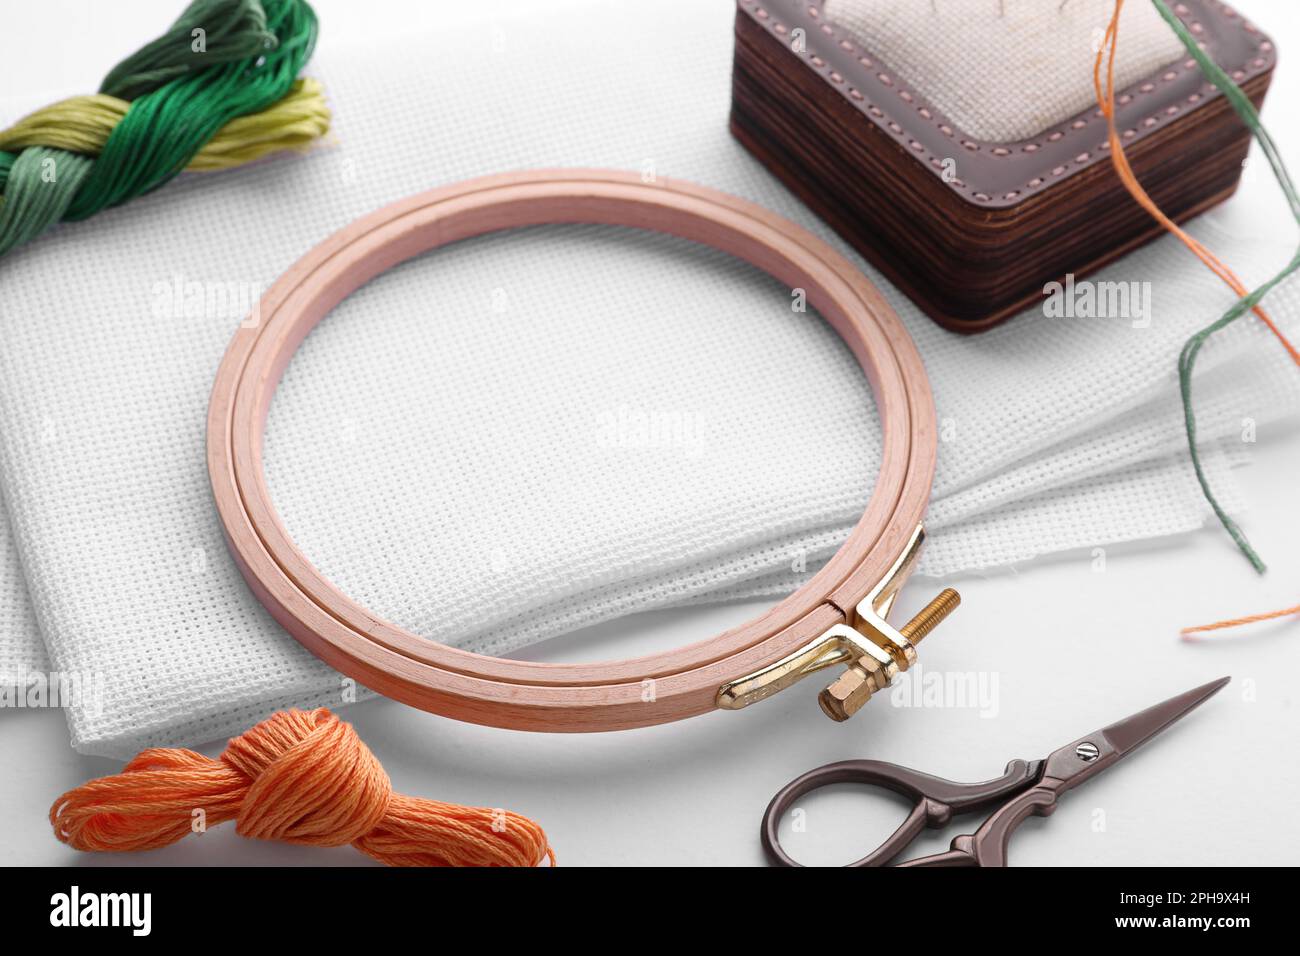 Embroidery hoop and multicolored accessories on white linen canvas with  spools of thread, needle and scissors Stock Photo - Alamy